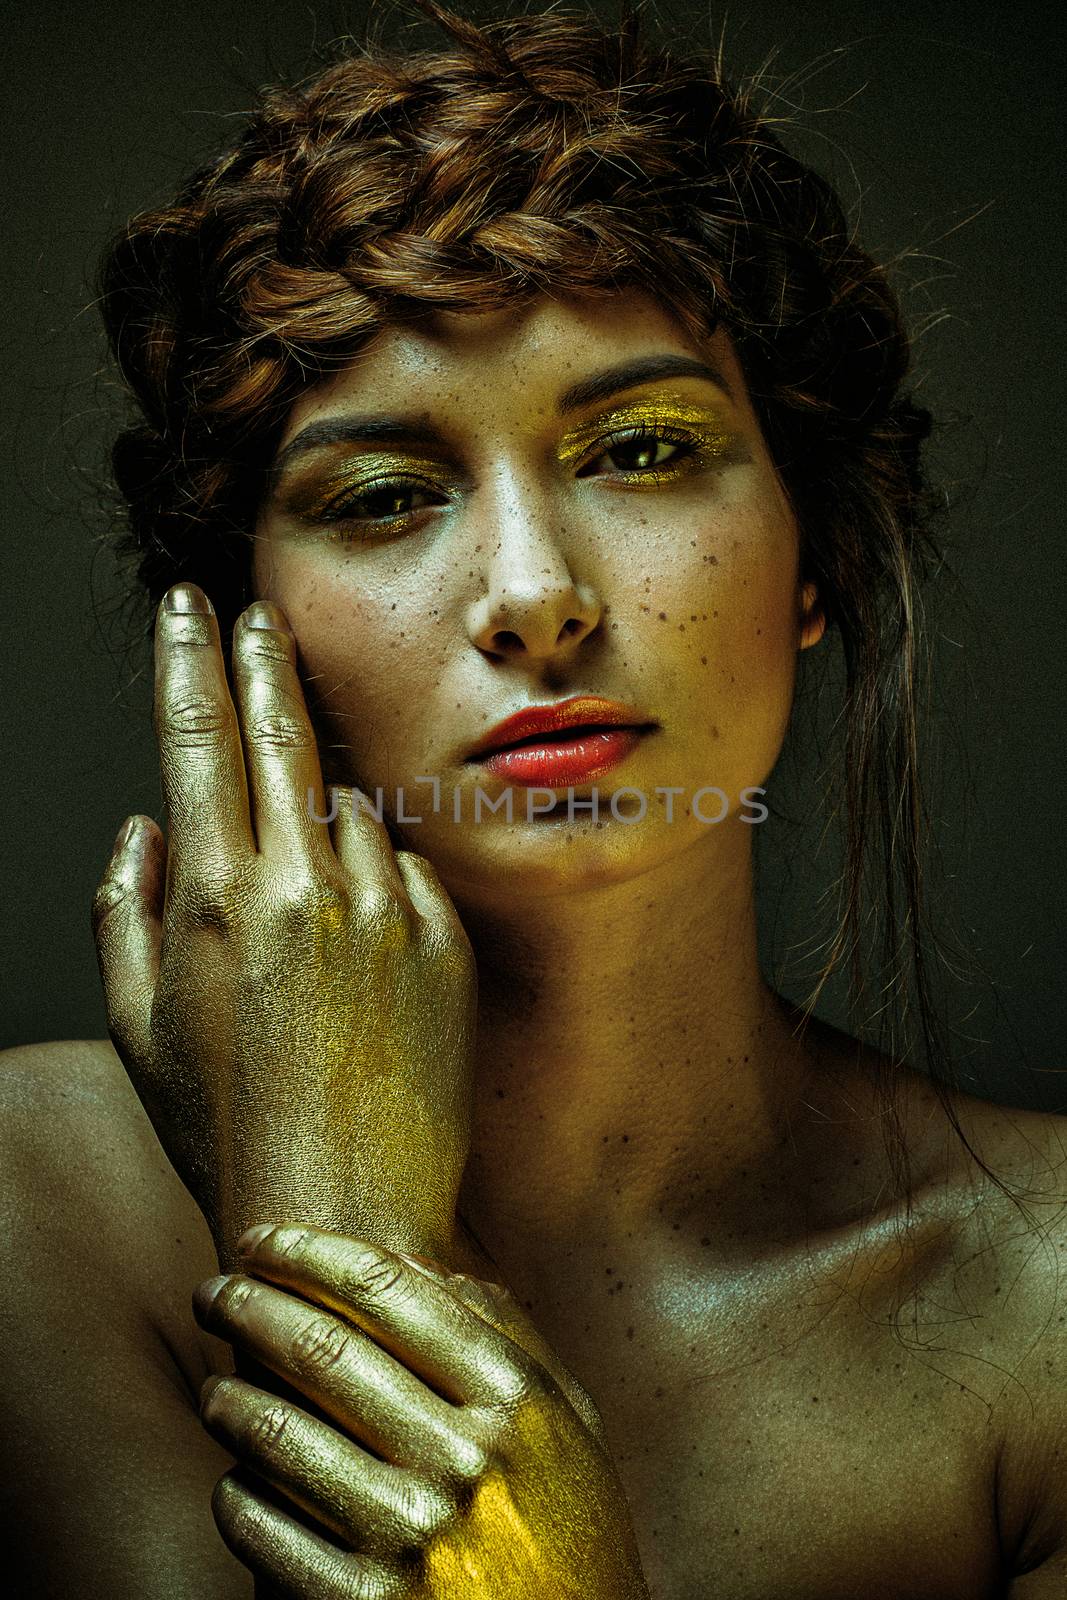 portrait extravagant and extreme gold makeup on cute girl face